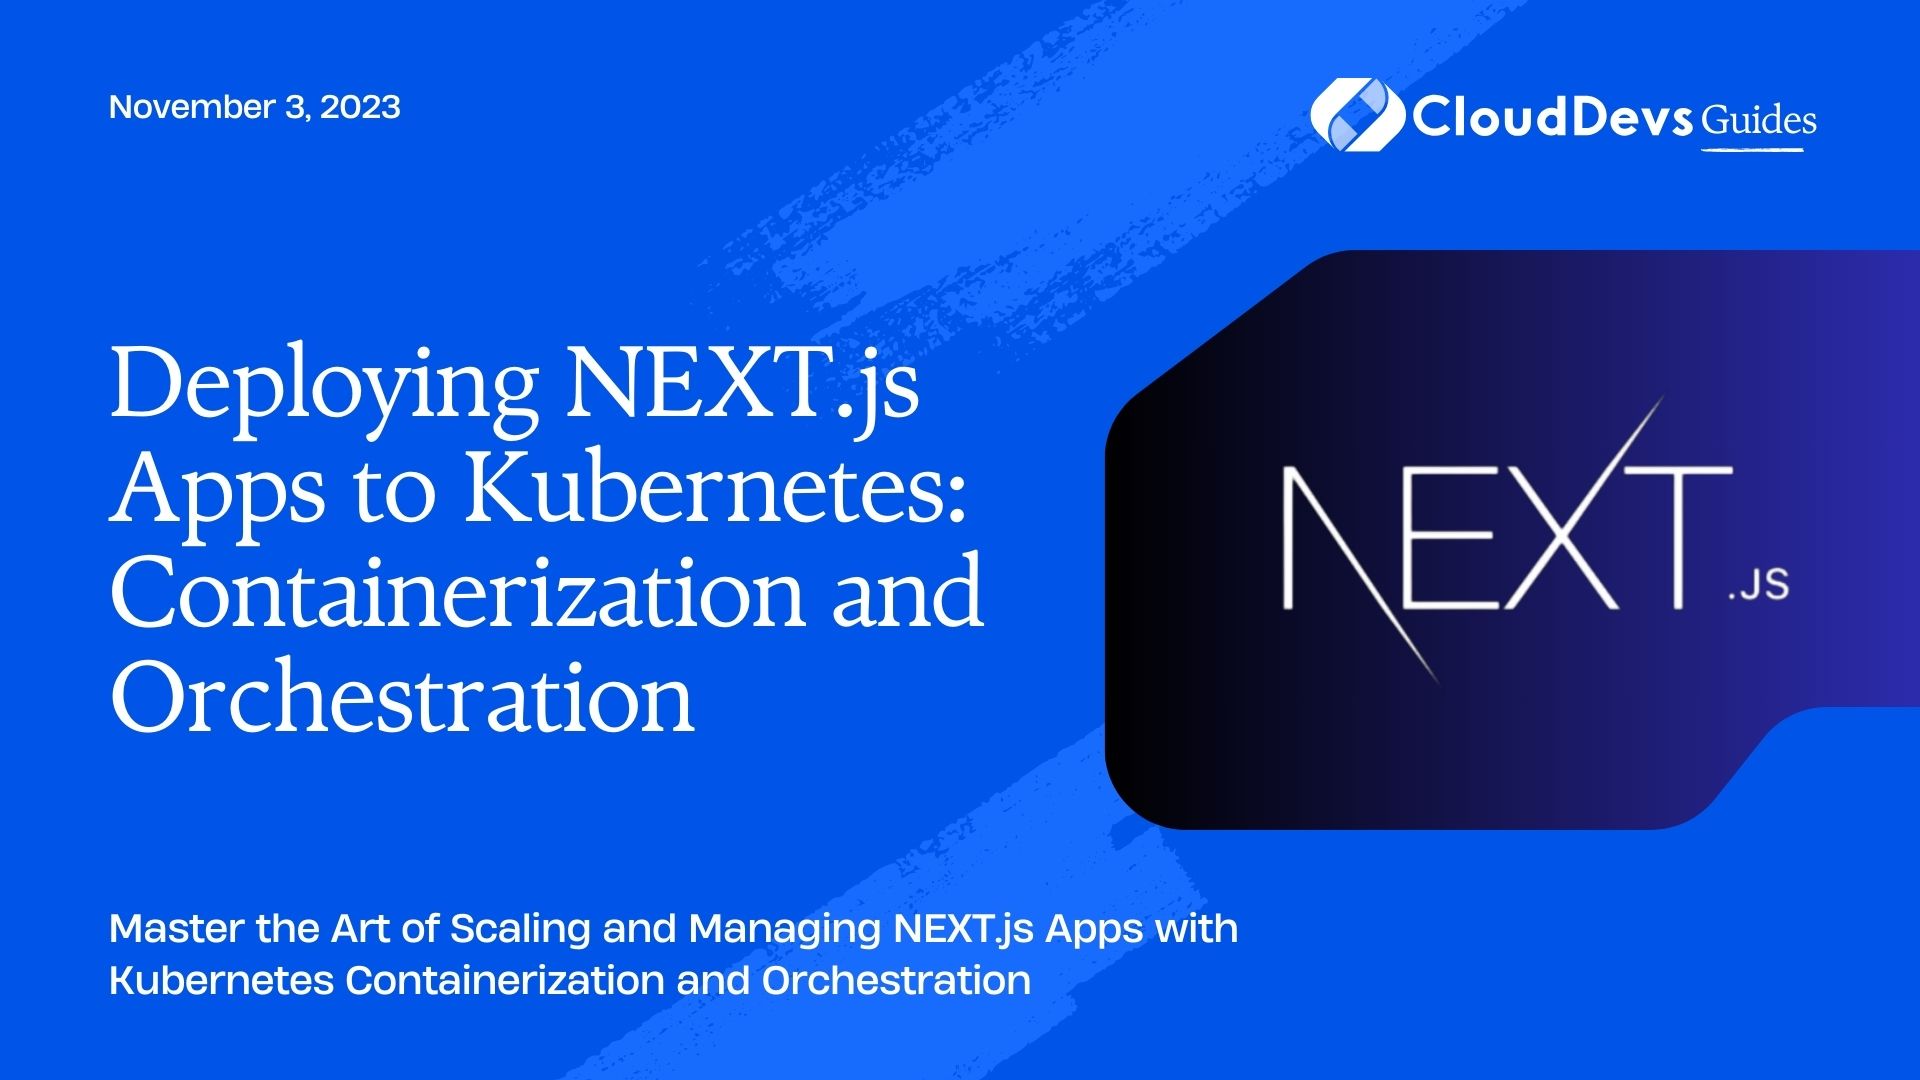 Deploying NEXT.js Apps to Kubernetes: Containerization and Orchestration